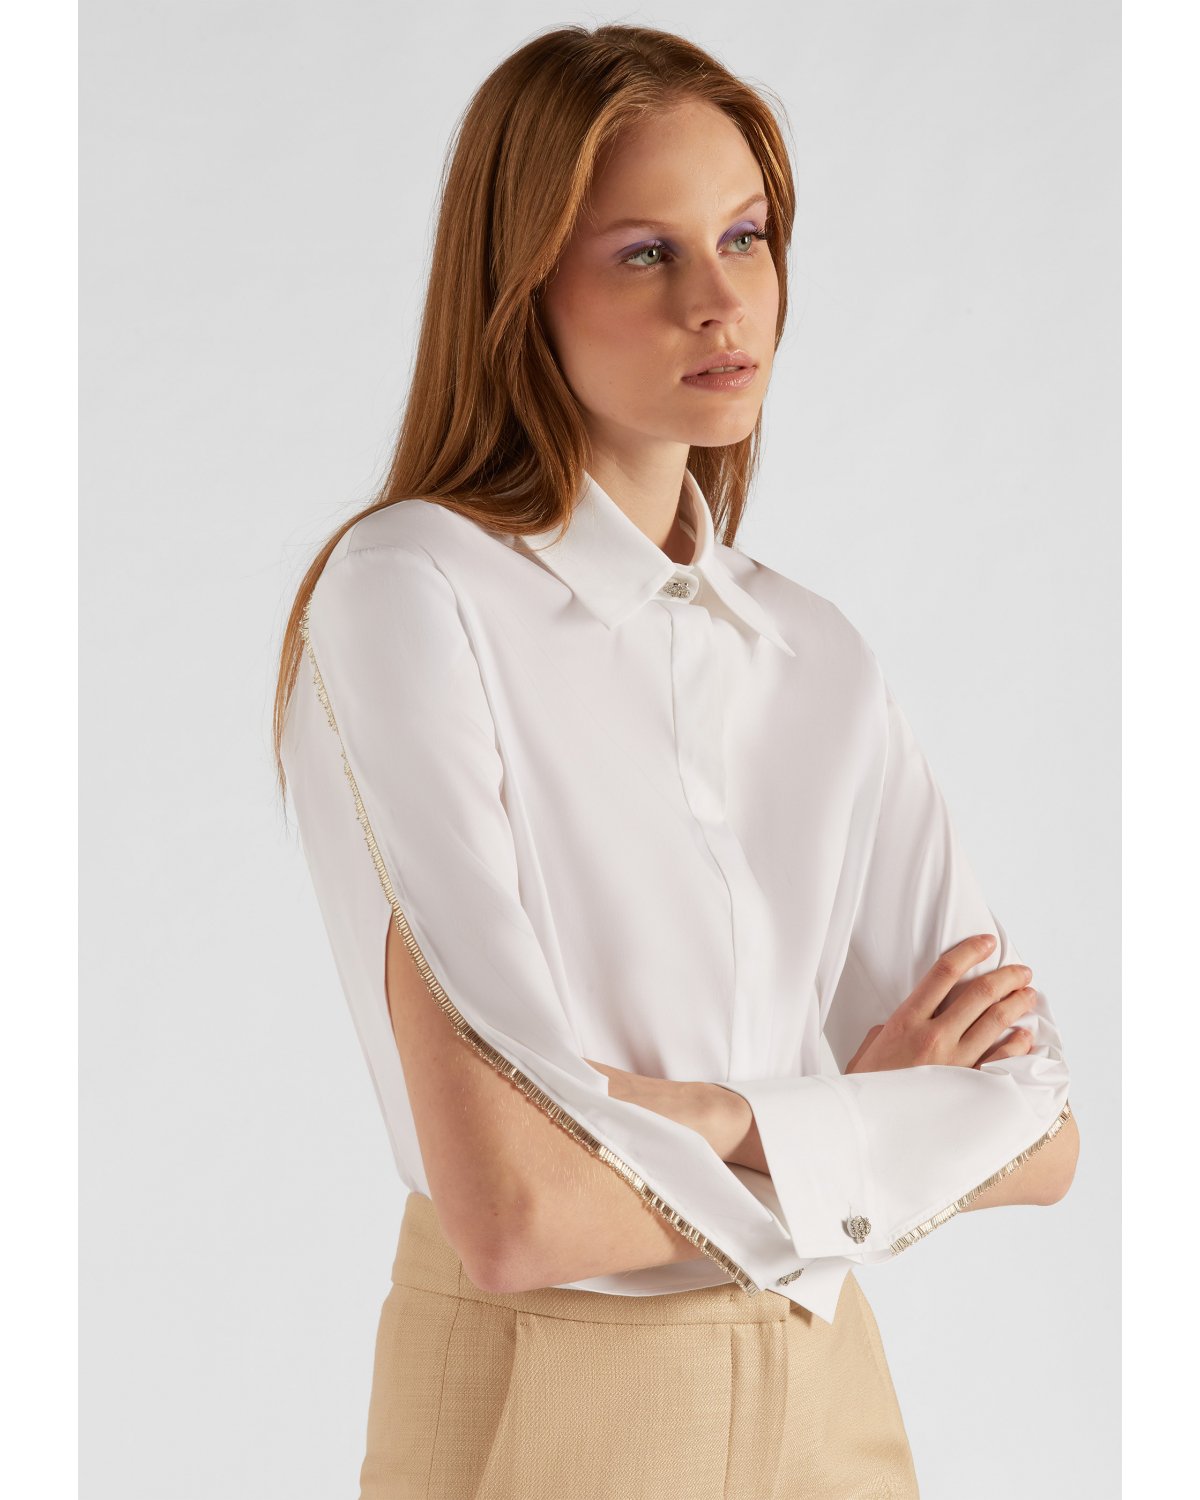 White shirt with petal sleeves | Spring Summer 2023 Collection, 73_74, Cruise 2023 Collection, Warm weather wear, Ready to Wear, Spring days, Summer Sale, Mid season sale -40% | Genny